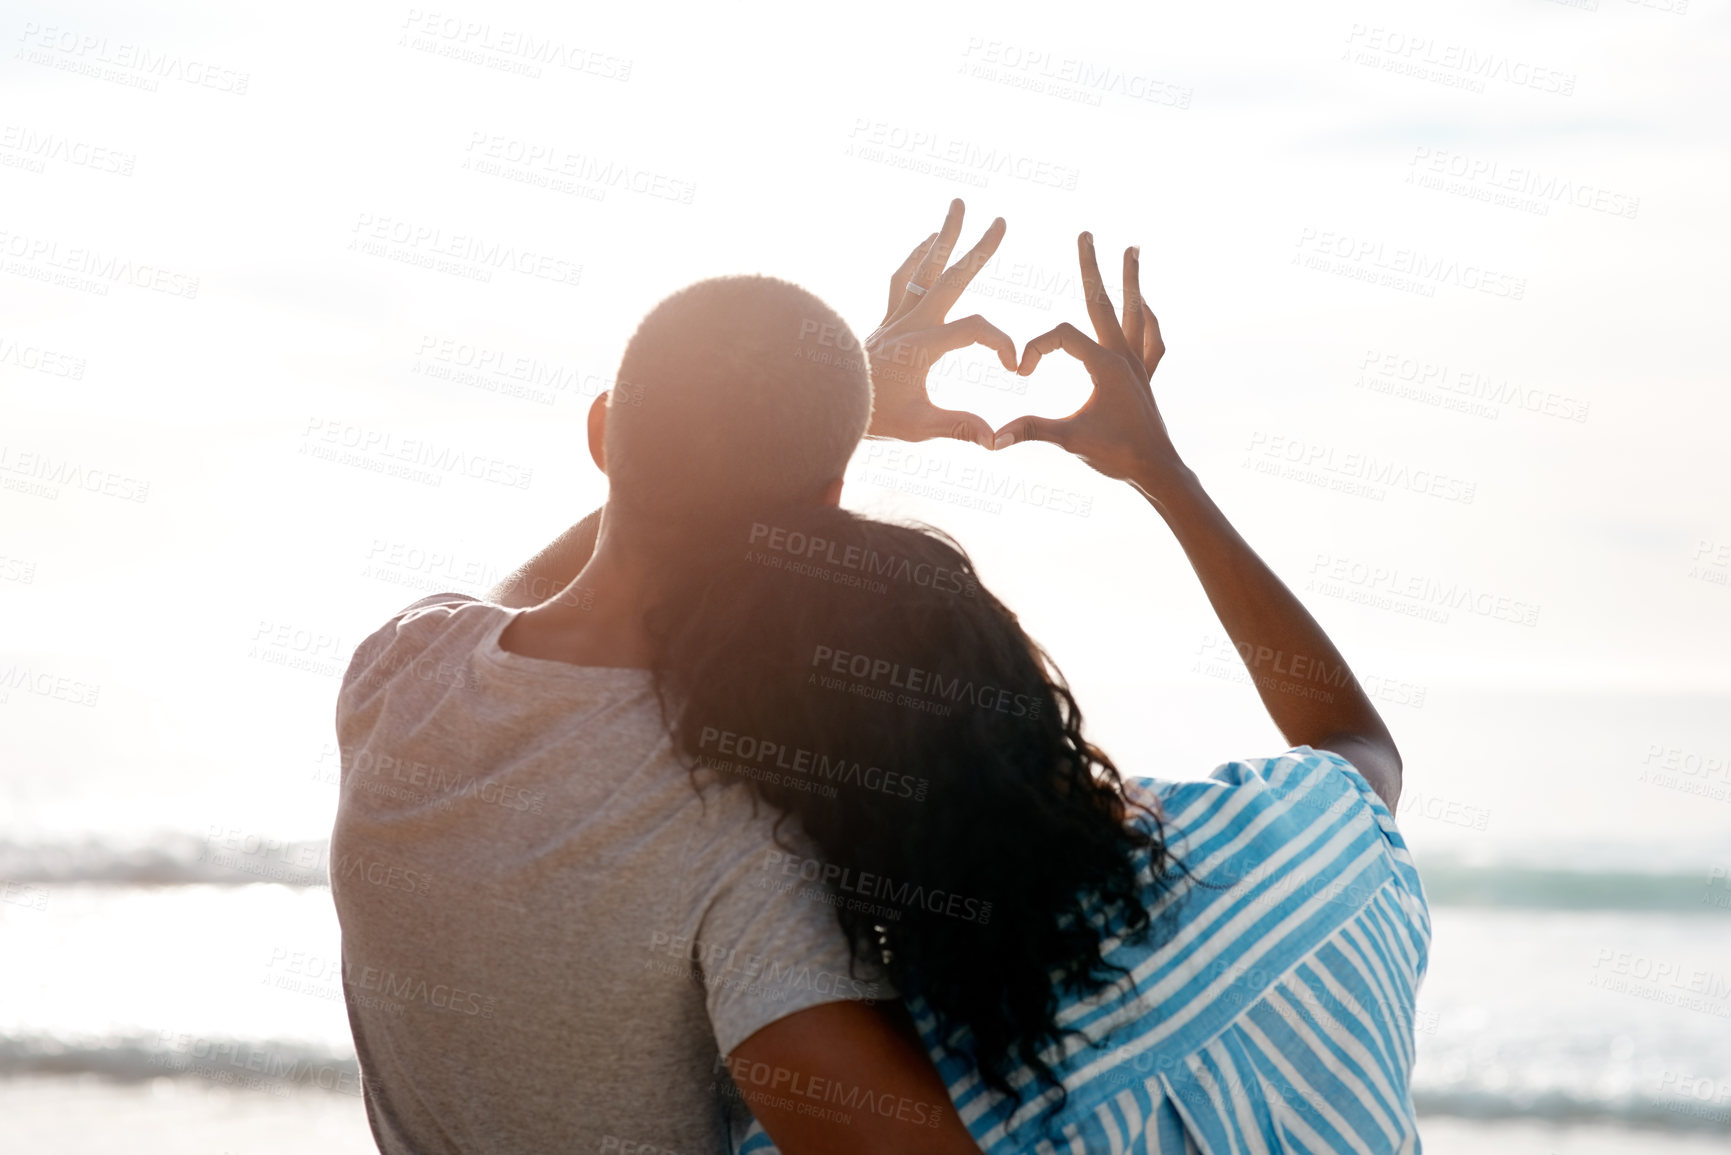 Buy stock photo Rearview shot of a young couple making a heart shape with their hands at the beach